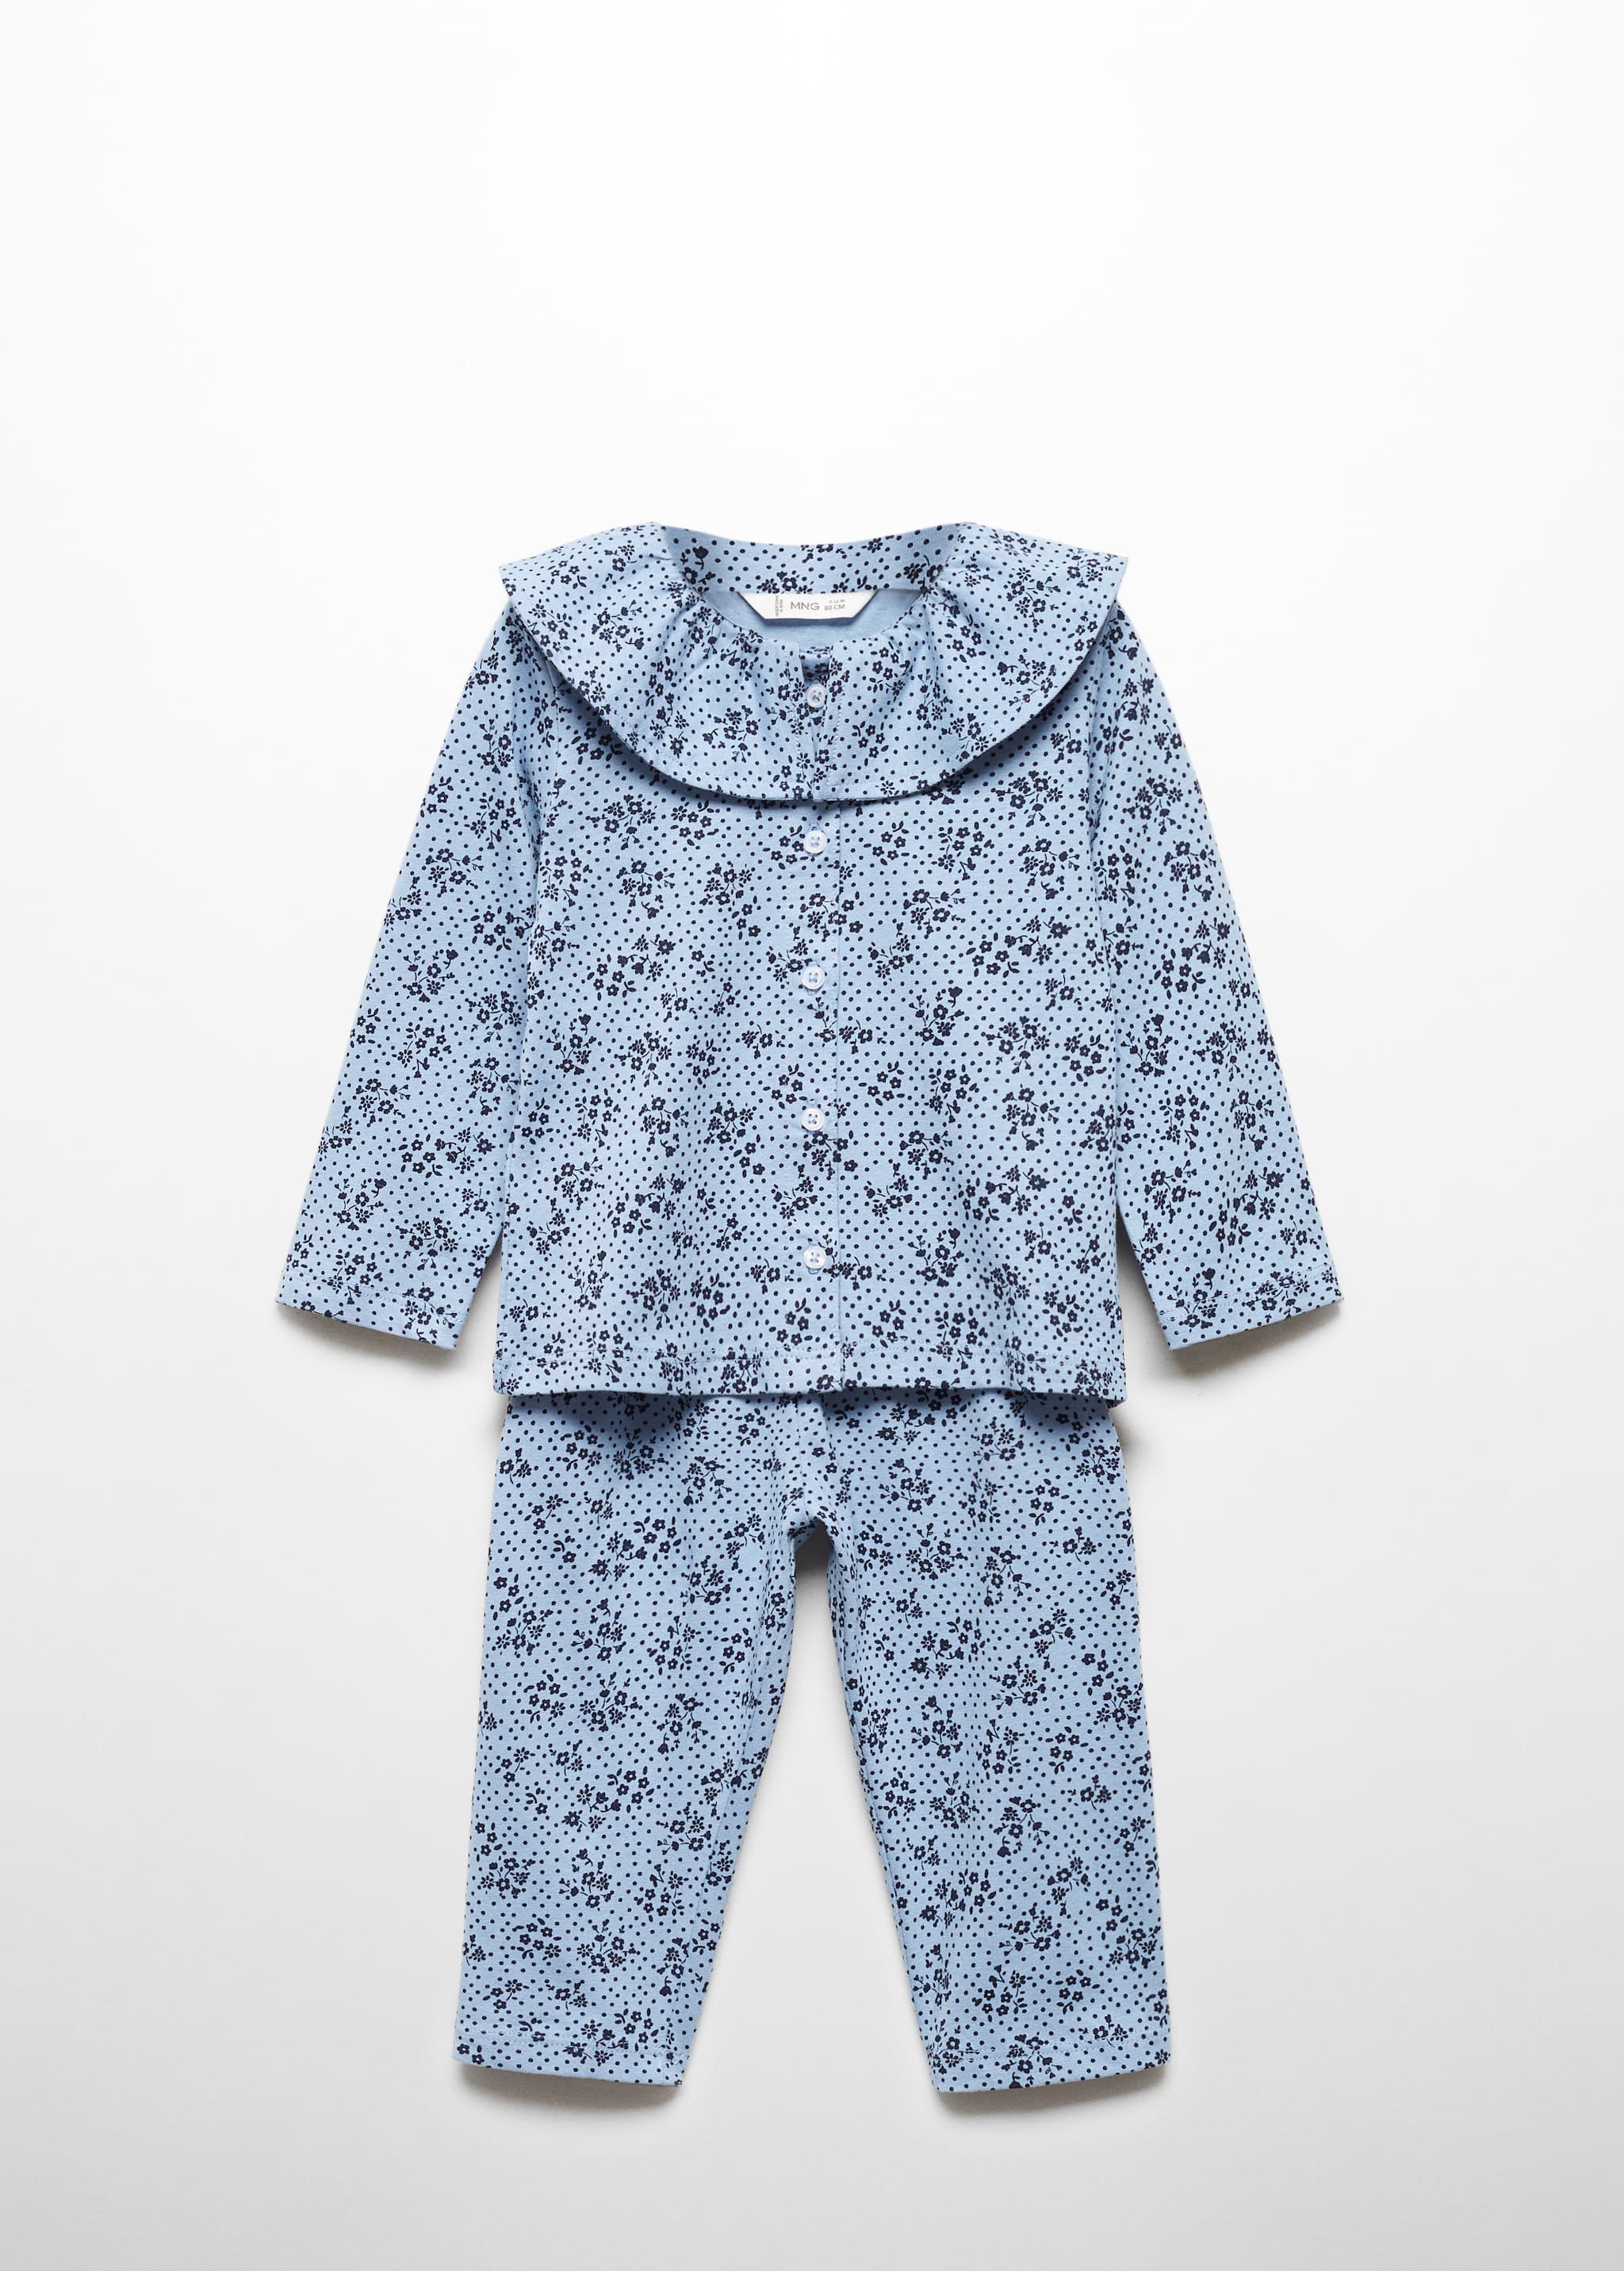 Printed cotton pyjamas - Article without model